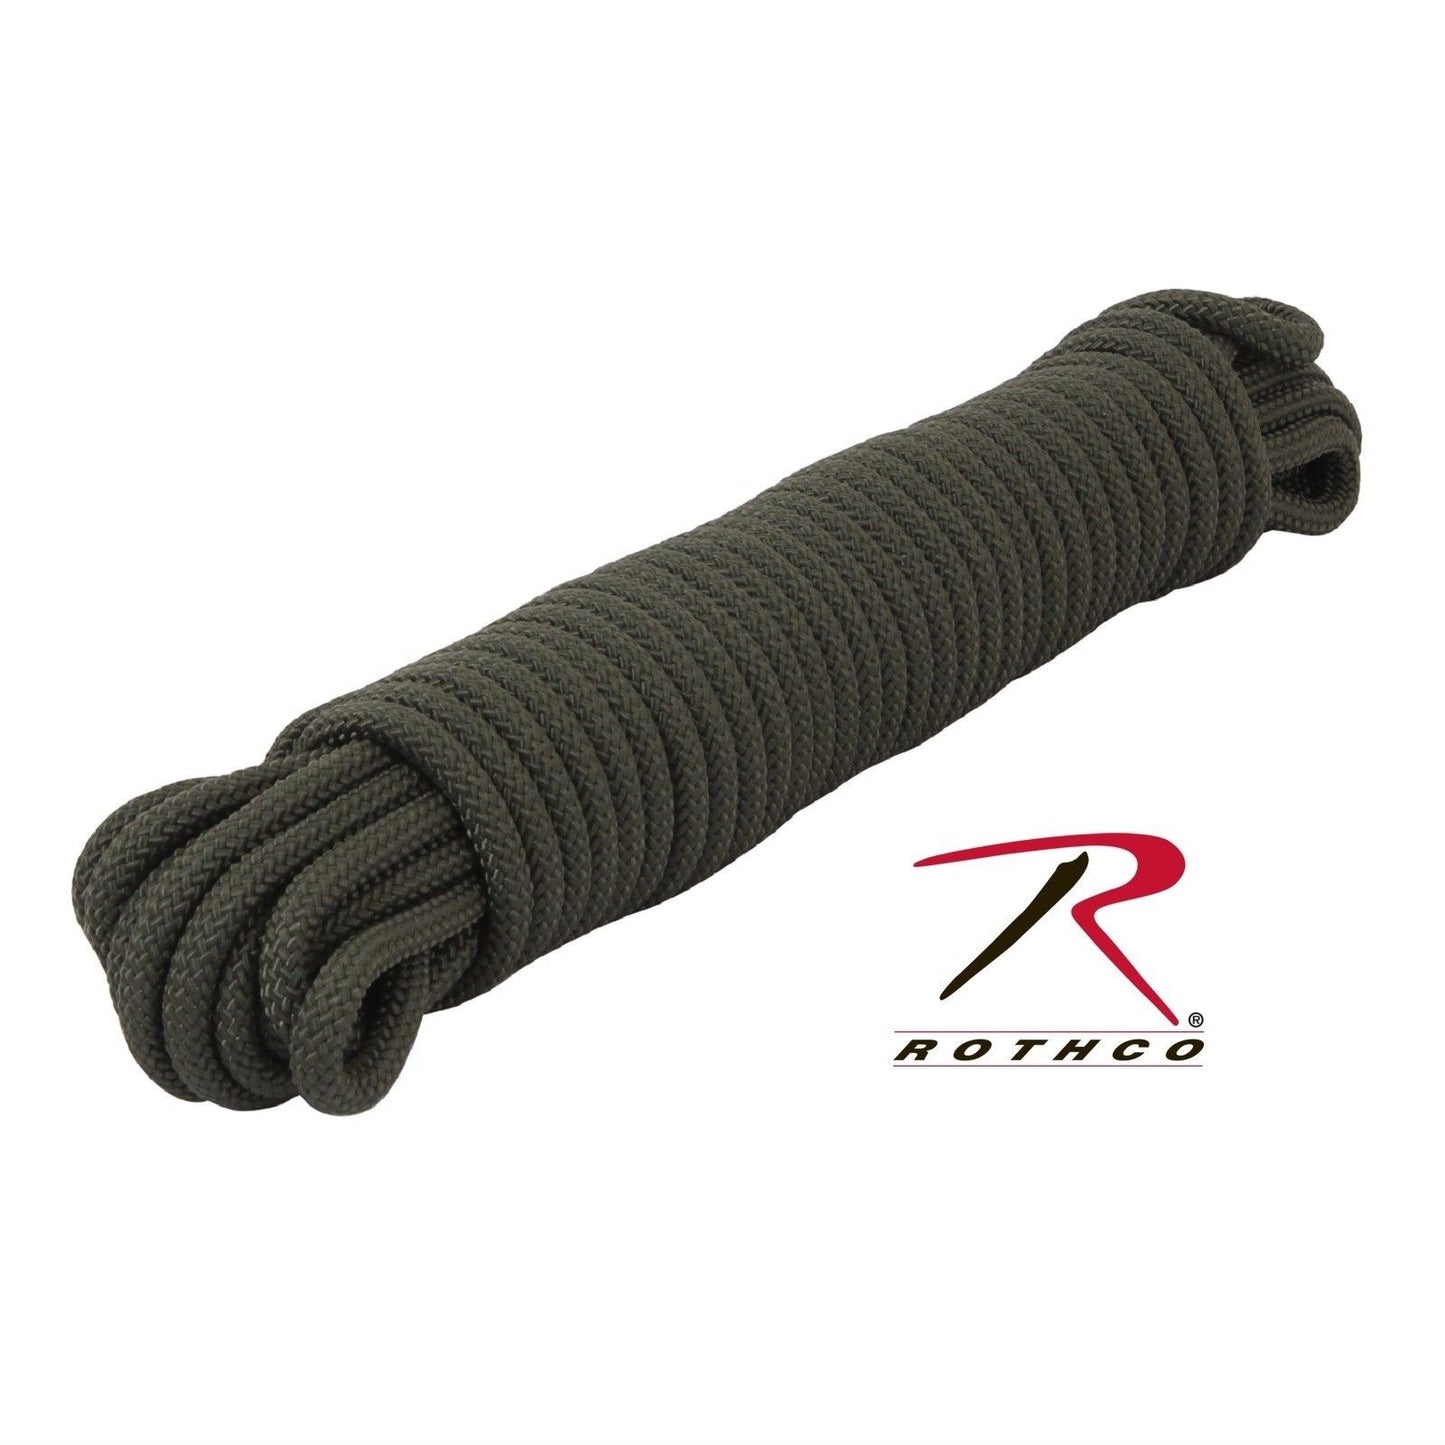 50' or 100' 3/8" Thick Olive Drab Tactical Utility Rope Tensile Strength: 1200lb